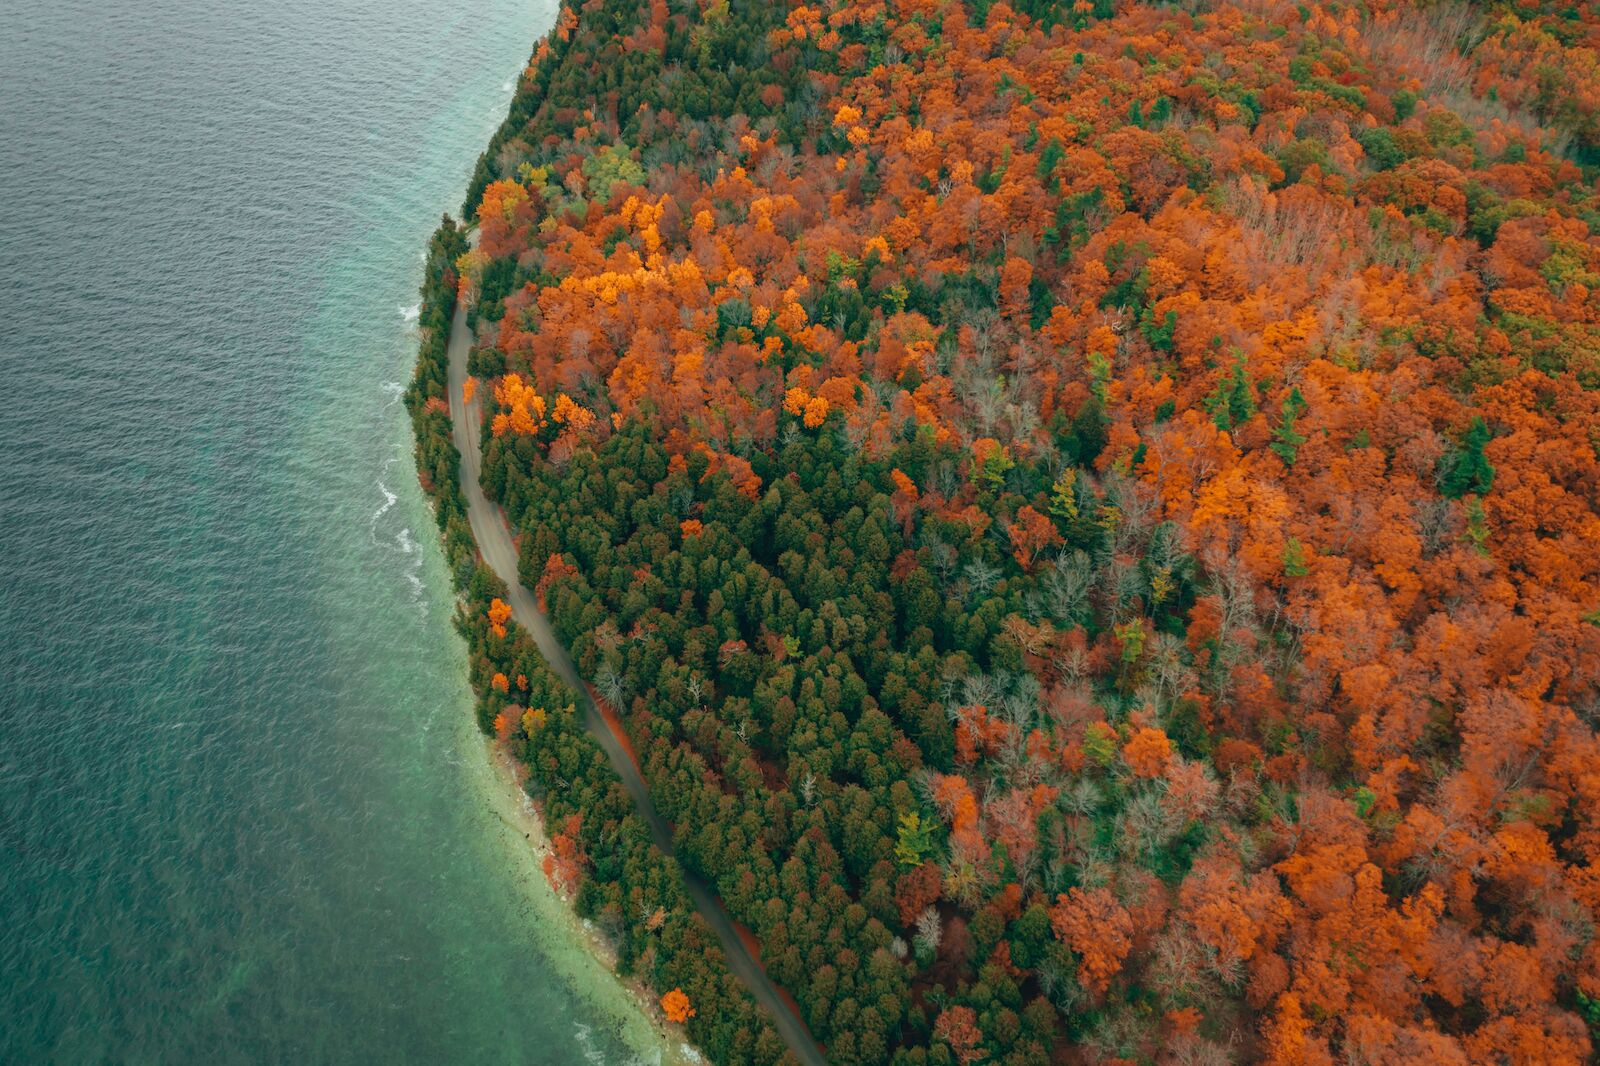 Aerial view of autumn forest in Peninsula State Park, Wisconsin. Road by the lake